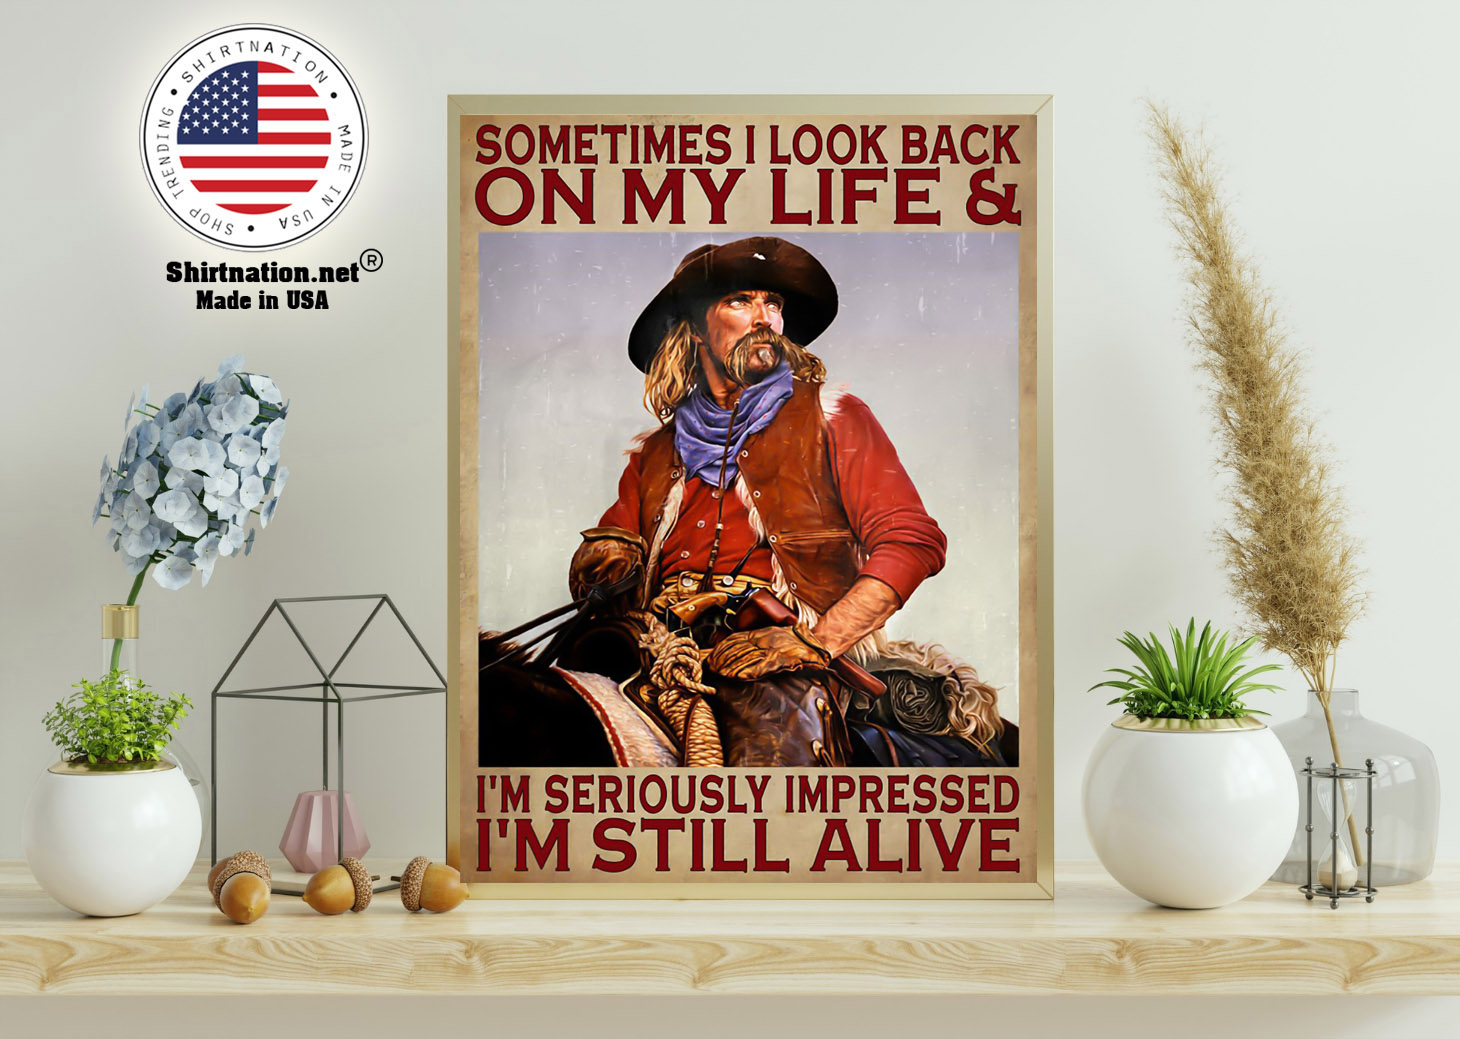 Sometimes I look back on my life and Im seriously impressed Im still alive poster 15